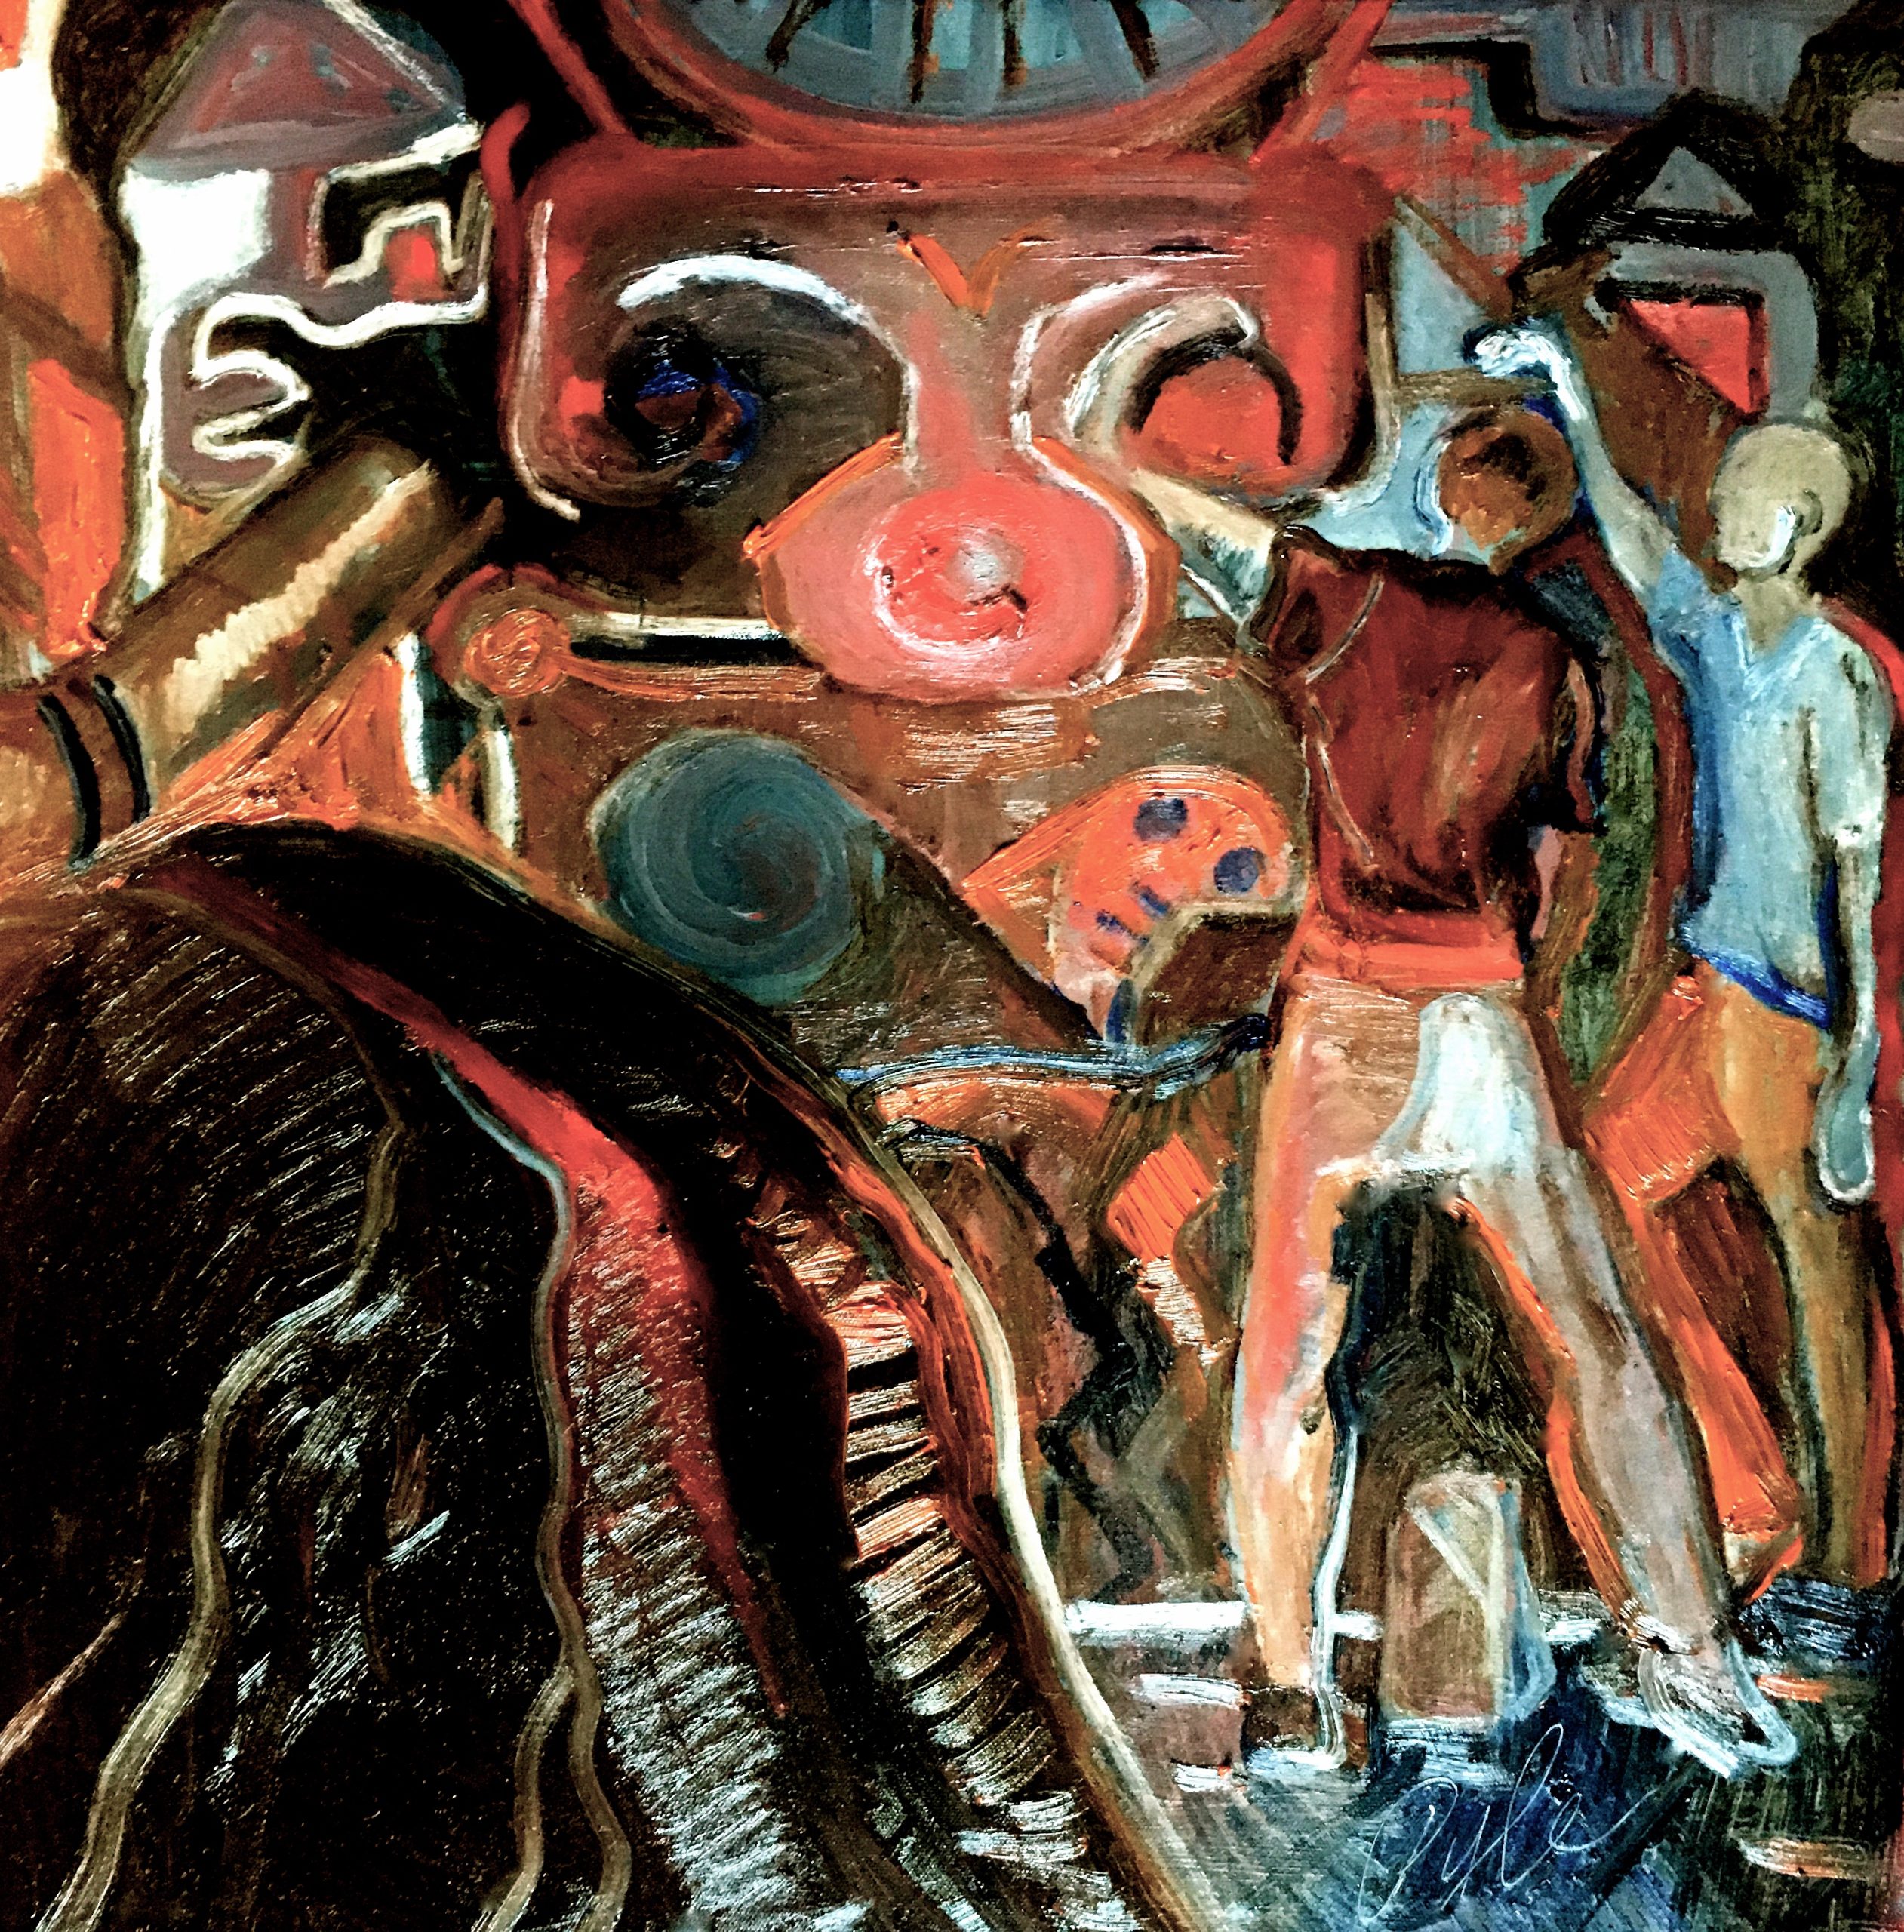 Two people on the right, one in a blue shirt, one in a red shirt, are turned towards a geometric machine-like background.